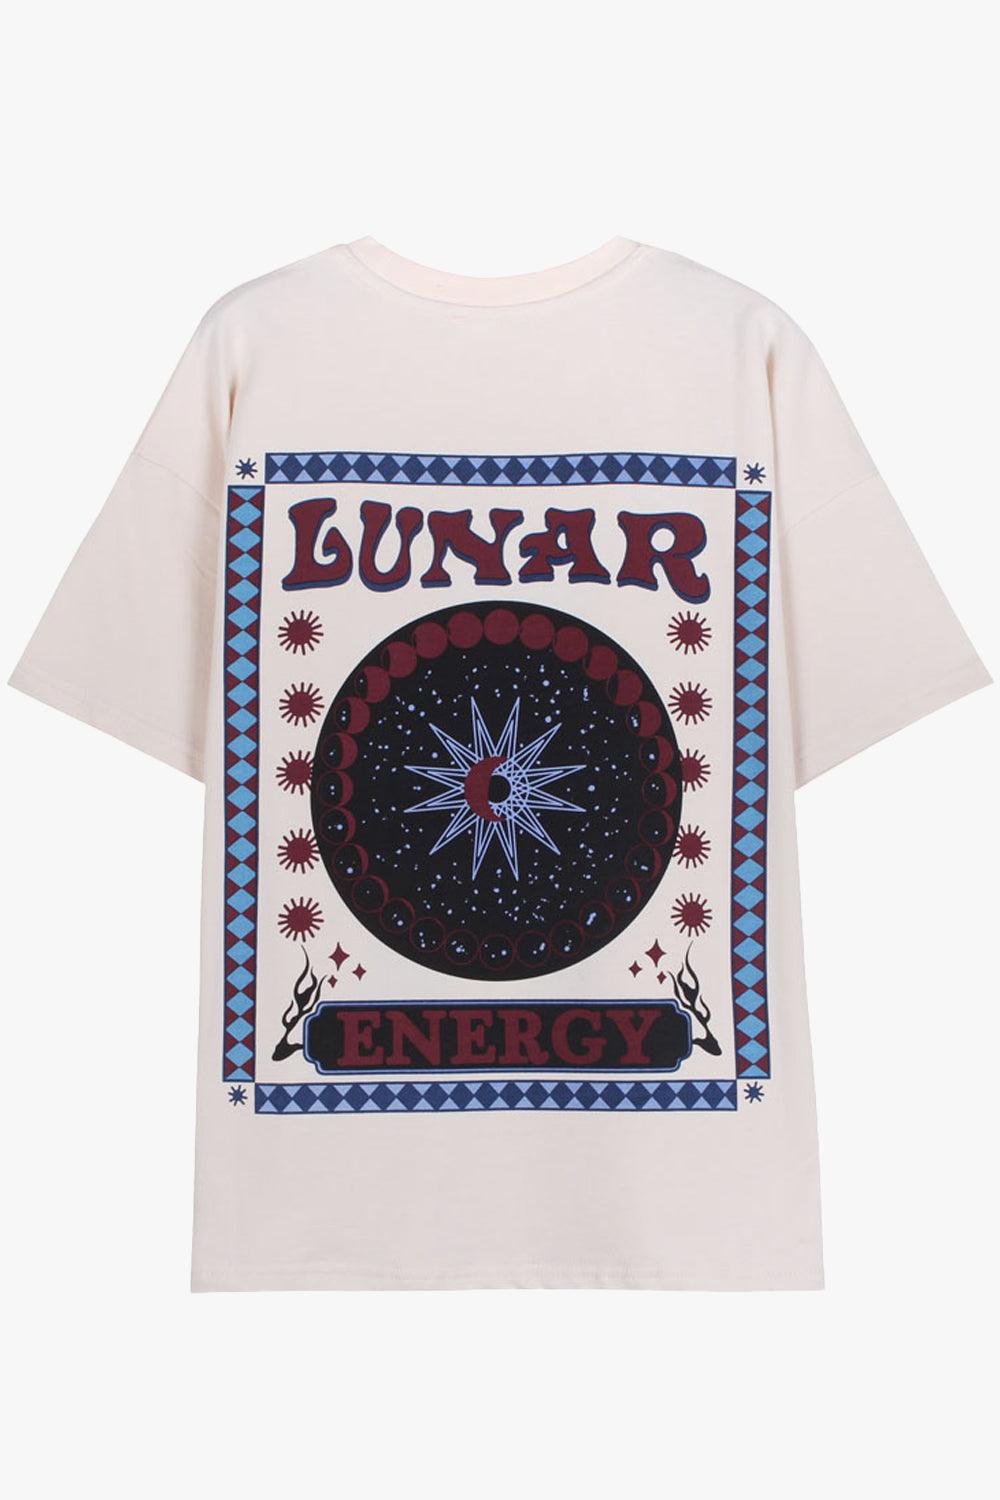 Lunar Energy Indie Aesthetic T-Shirt - Aesthetic Clothes Shop